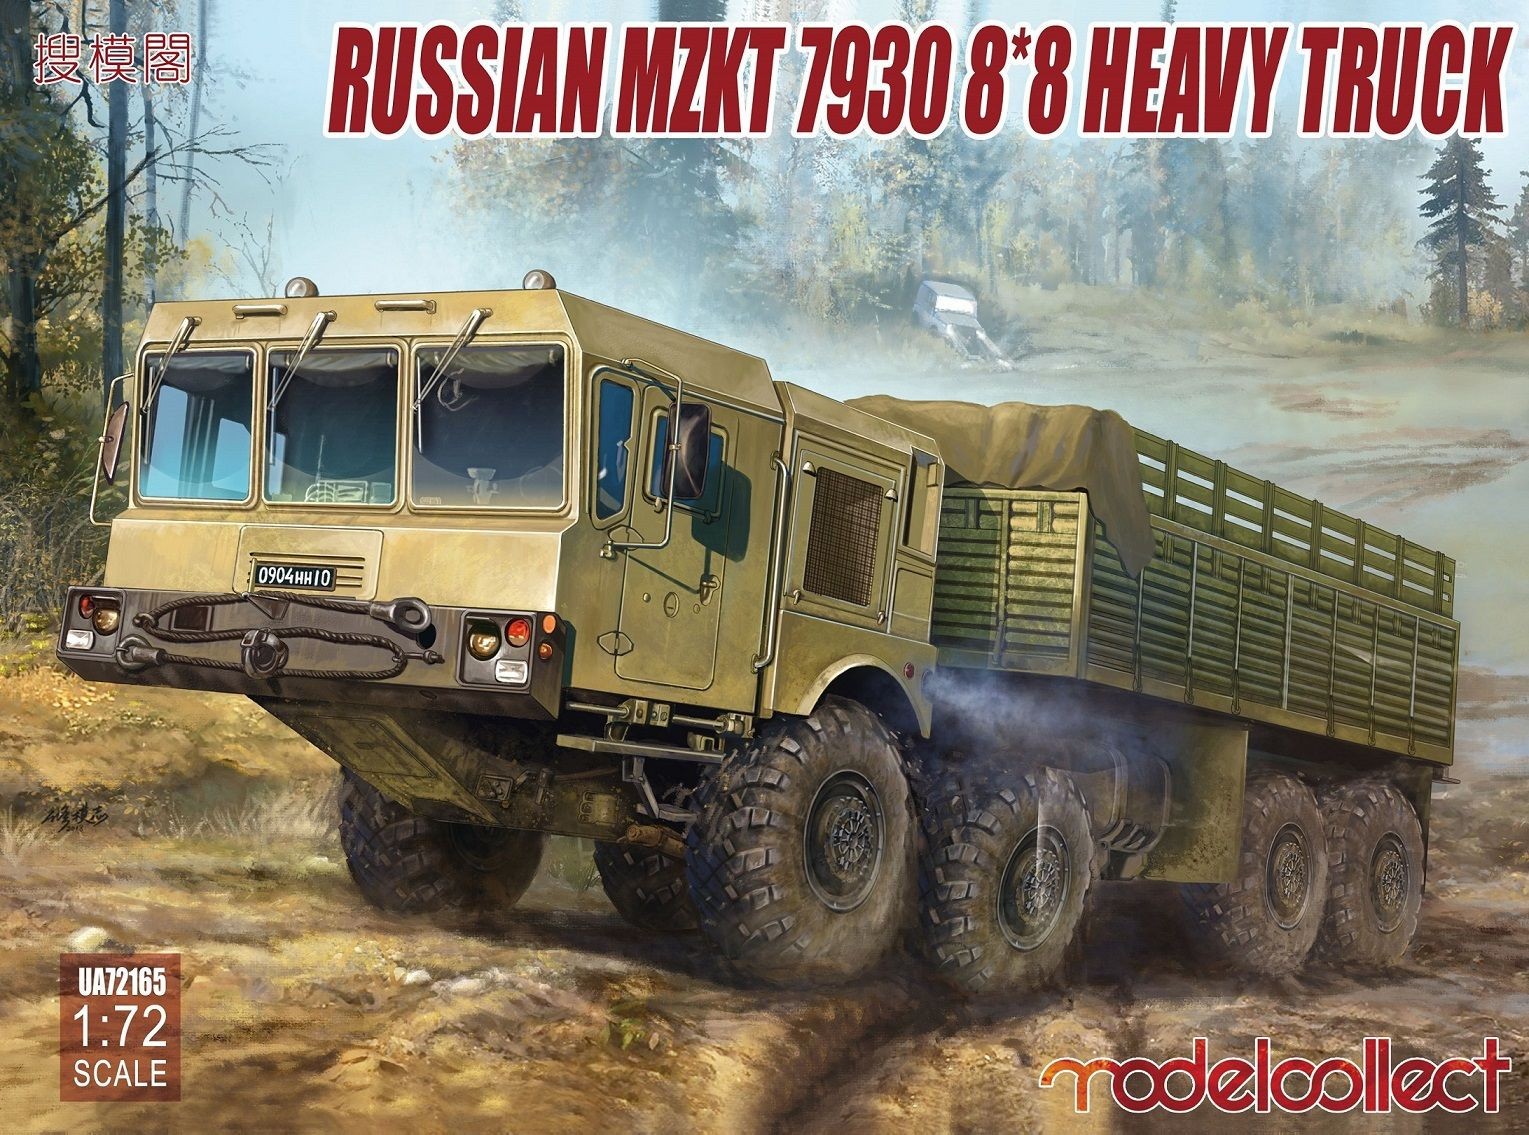 Maquette Modelcollect Camion lourd russe MZKT 7930 8 * 8-1/72 - Maquet